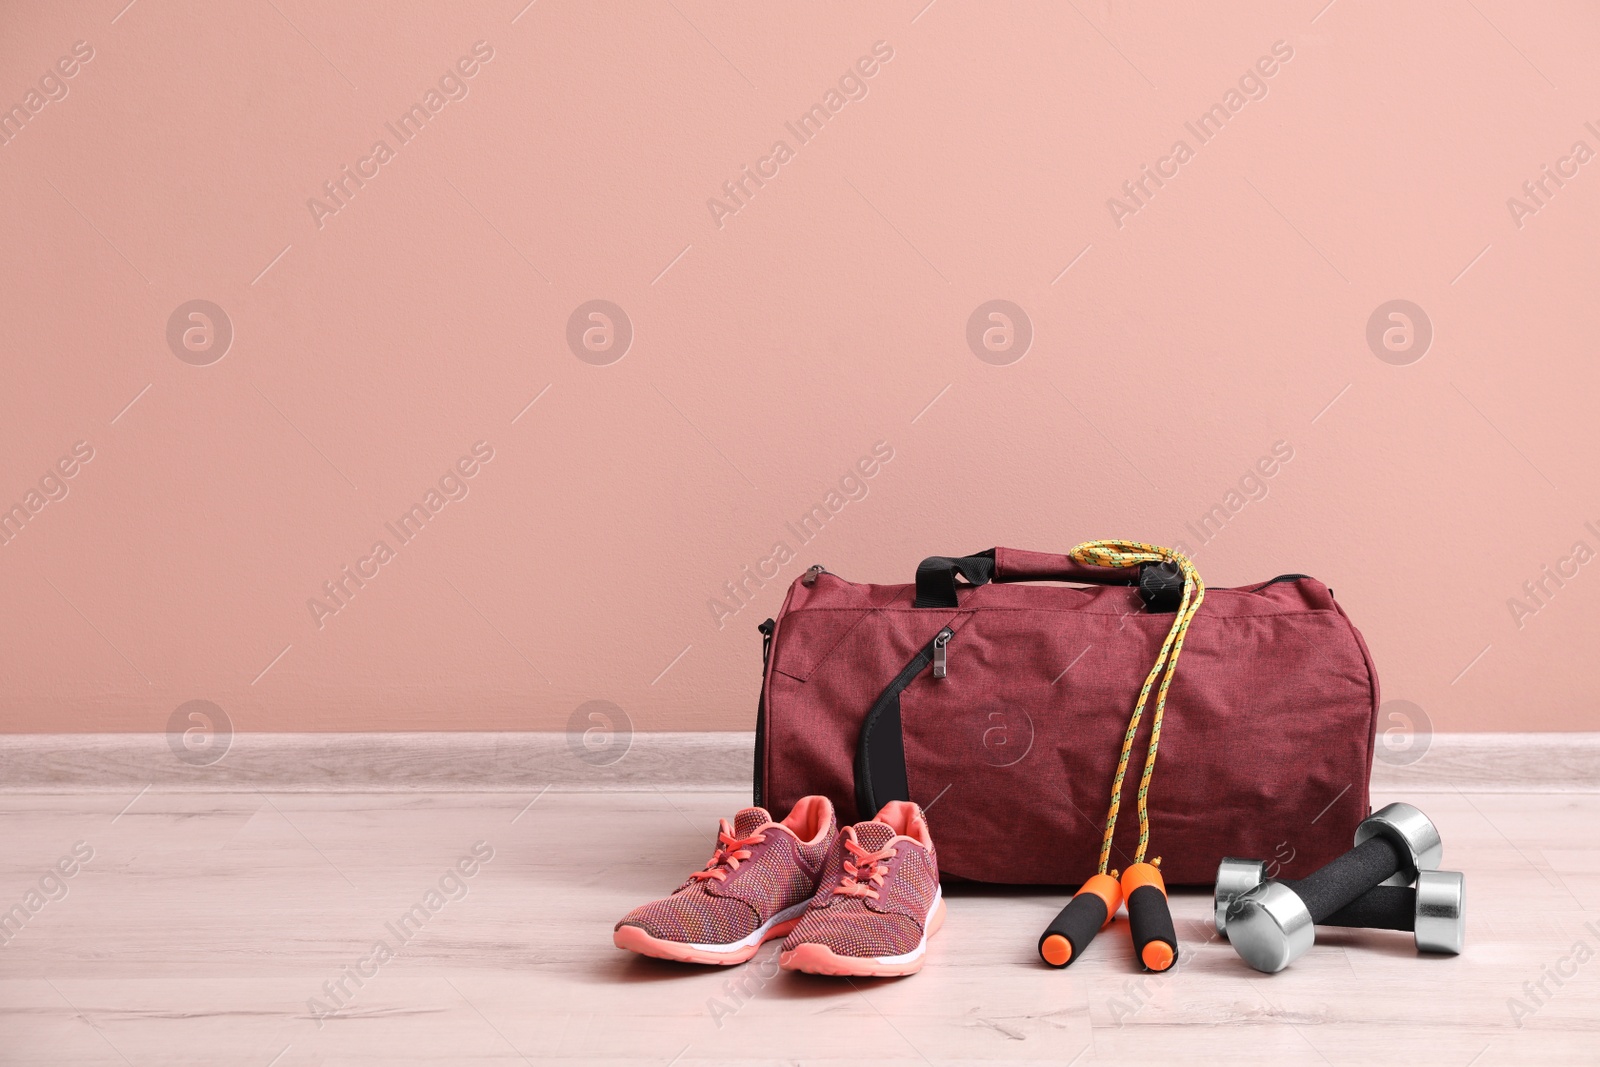 Photo of Red bag and sports accessories on floor near pink wall, space for text